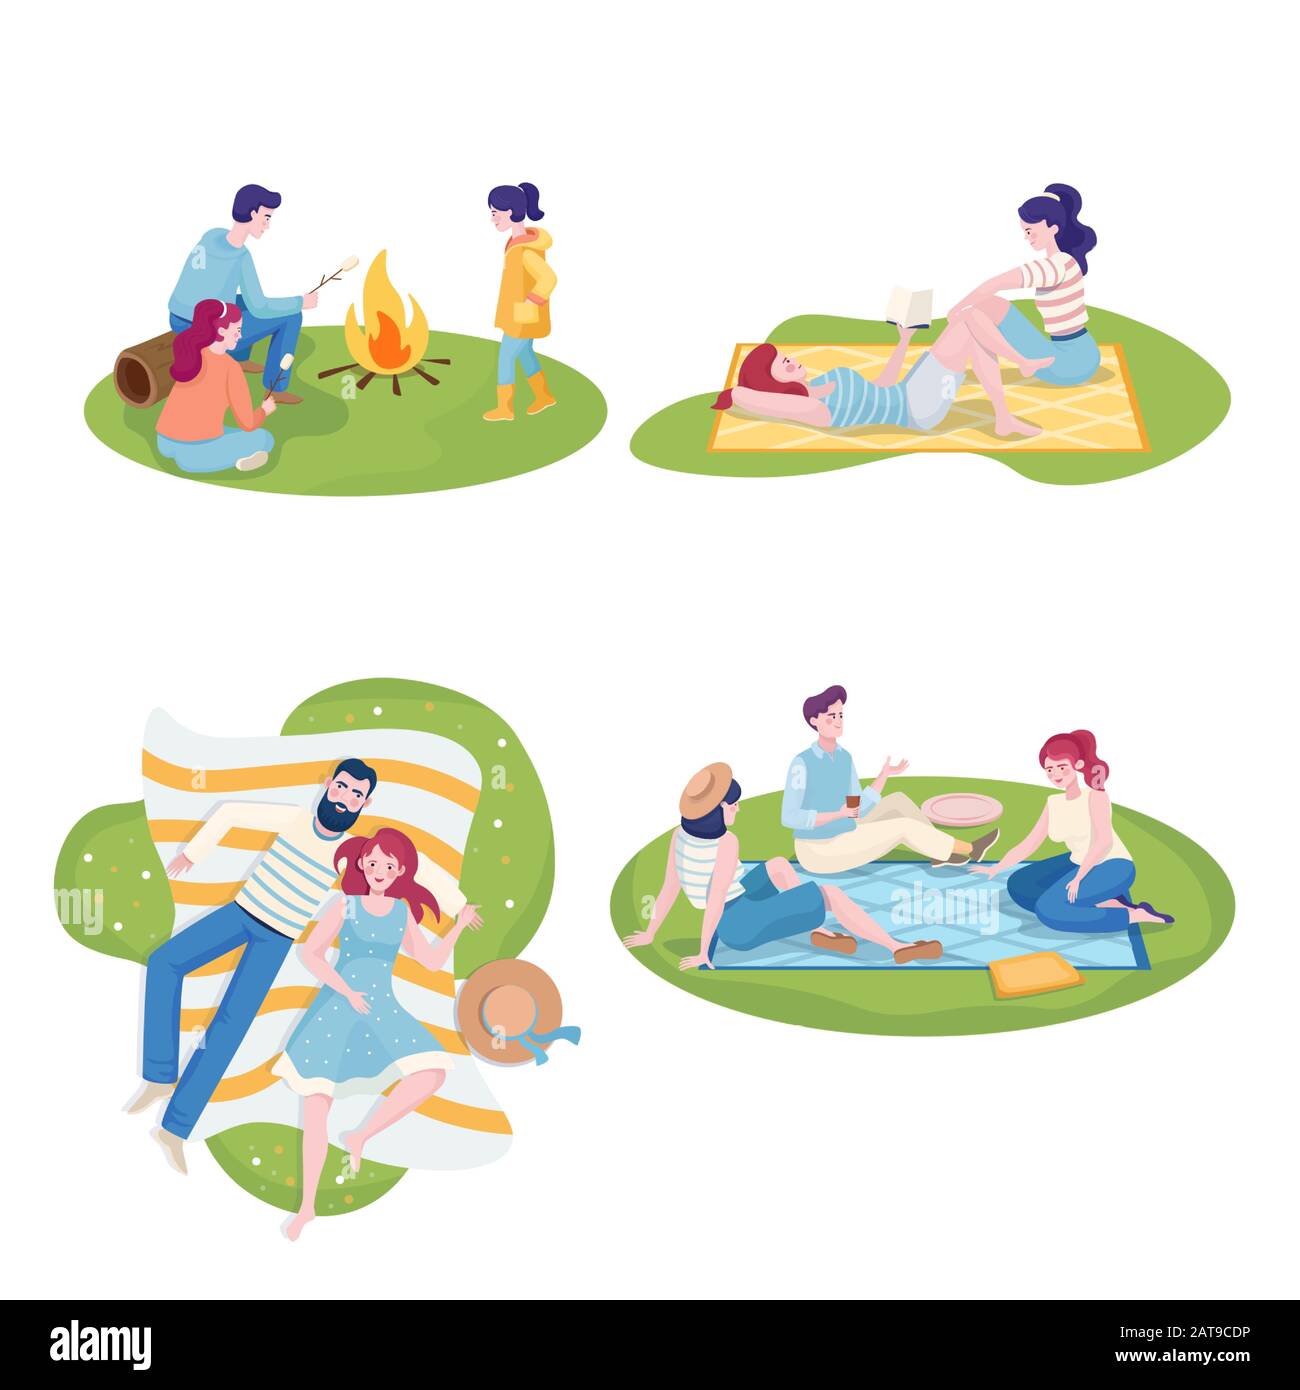 Download Set Of Happy People On Summer Camping Flat Vector Illustration Best Friend Characters At Summer Picnic Family Cooking Marshmallow Couple And Two Young Girls Spending Time Together Stock Vector Image Art